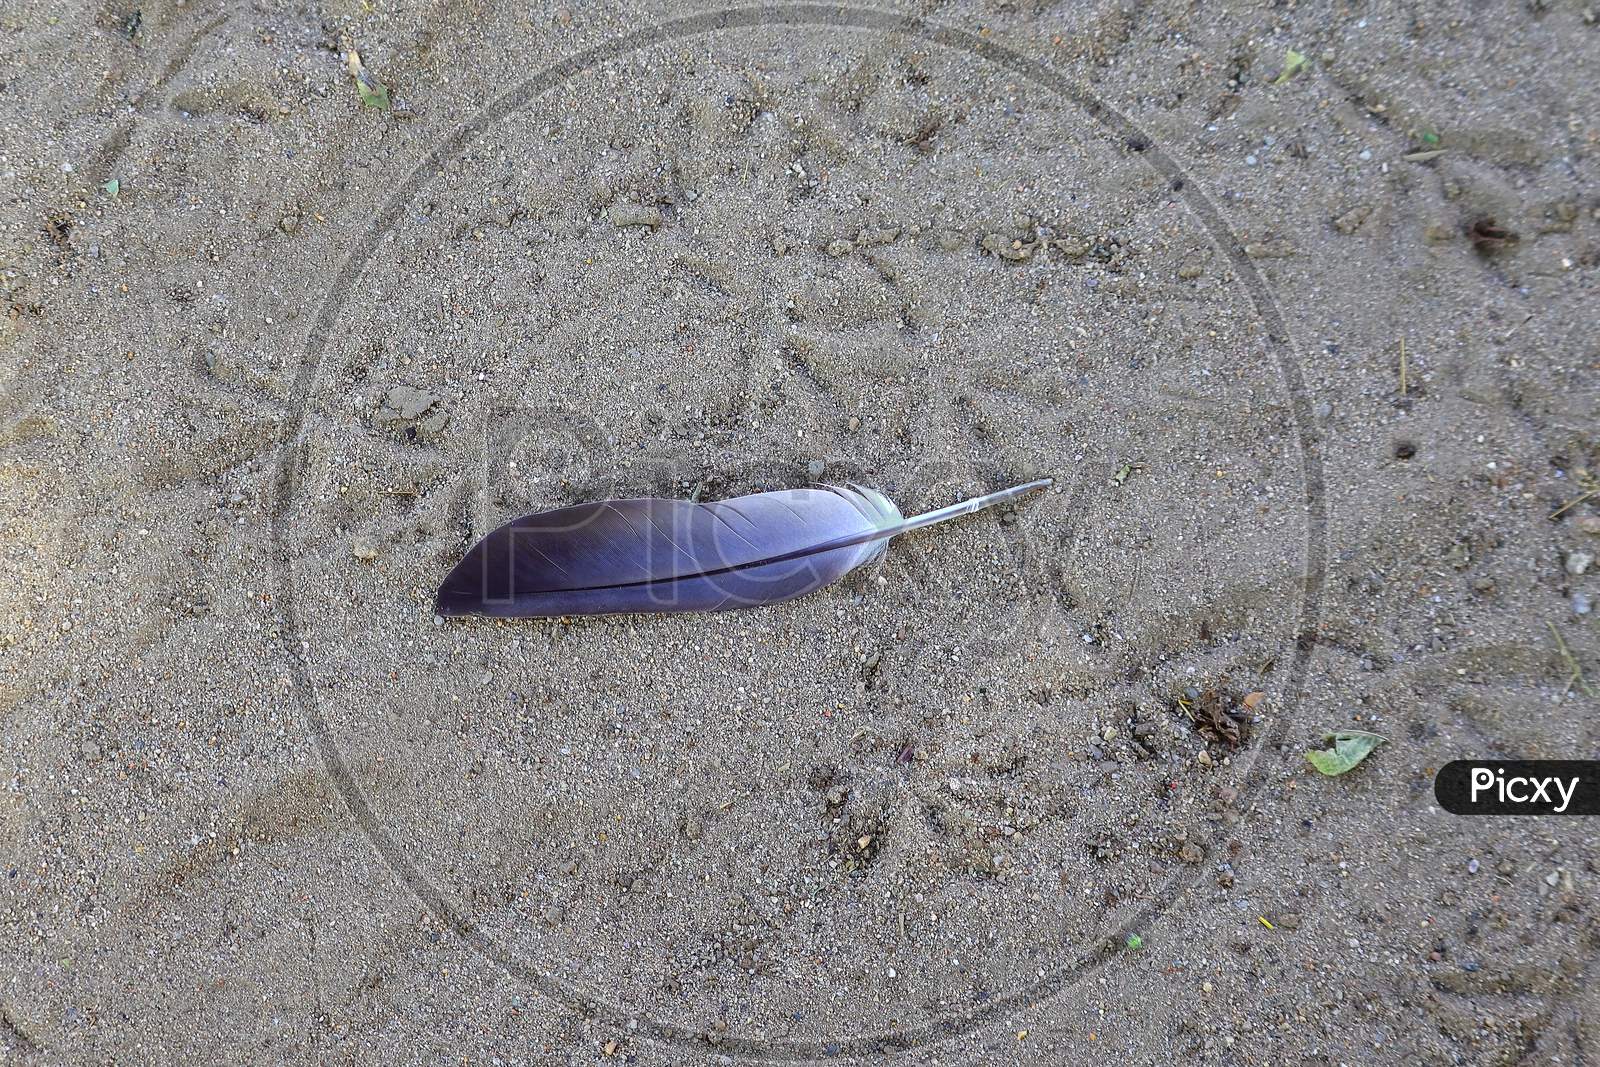 A Feather Or Wings Of Pigeon On The Ground, Bird Feather